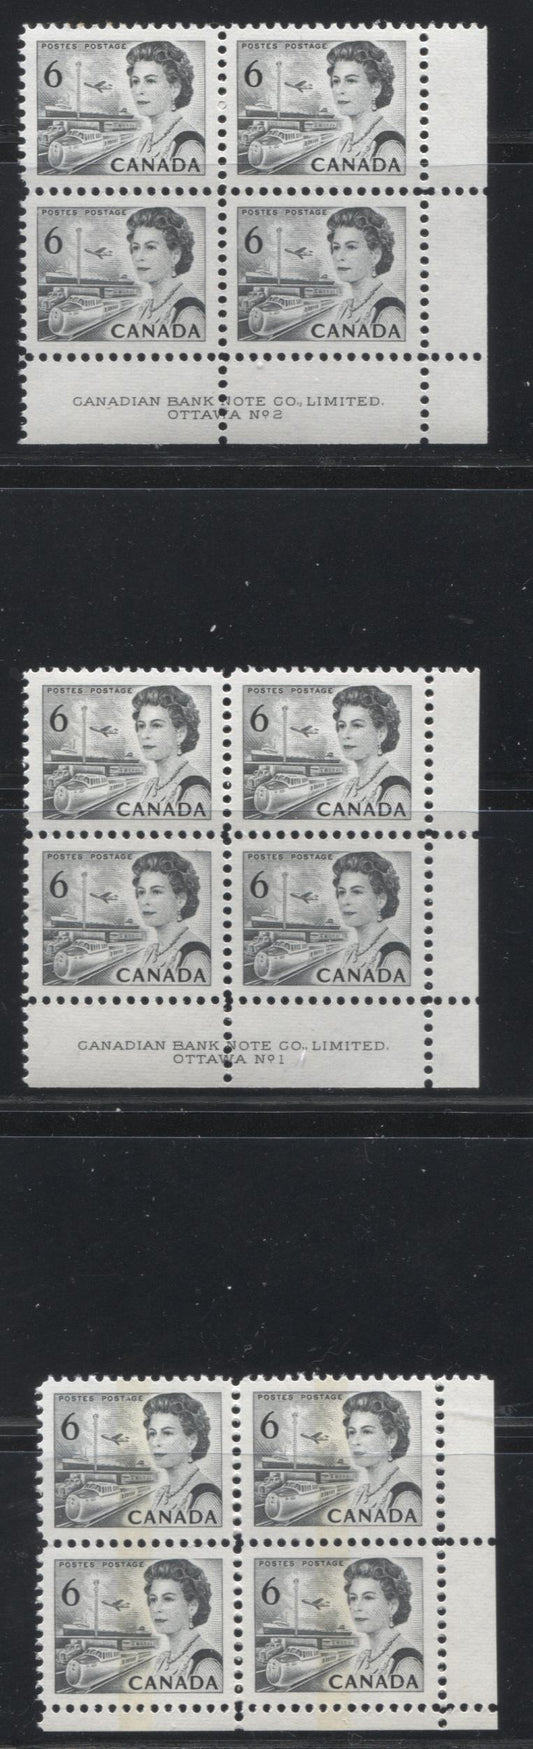 Lot 89 Canada #460f-fp 6c Black Queen Elizabeth II, 1967-1973 Centennial Issue, Three VFNH Untagged Or WCB Tagged LR Plate 1-2 Or Blank Blocks of 4 On LF Ribbed Paper With PVA Gum, Die 1a, Perf 12